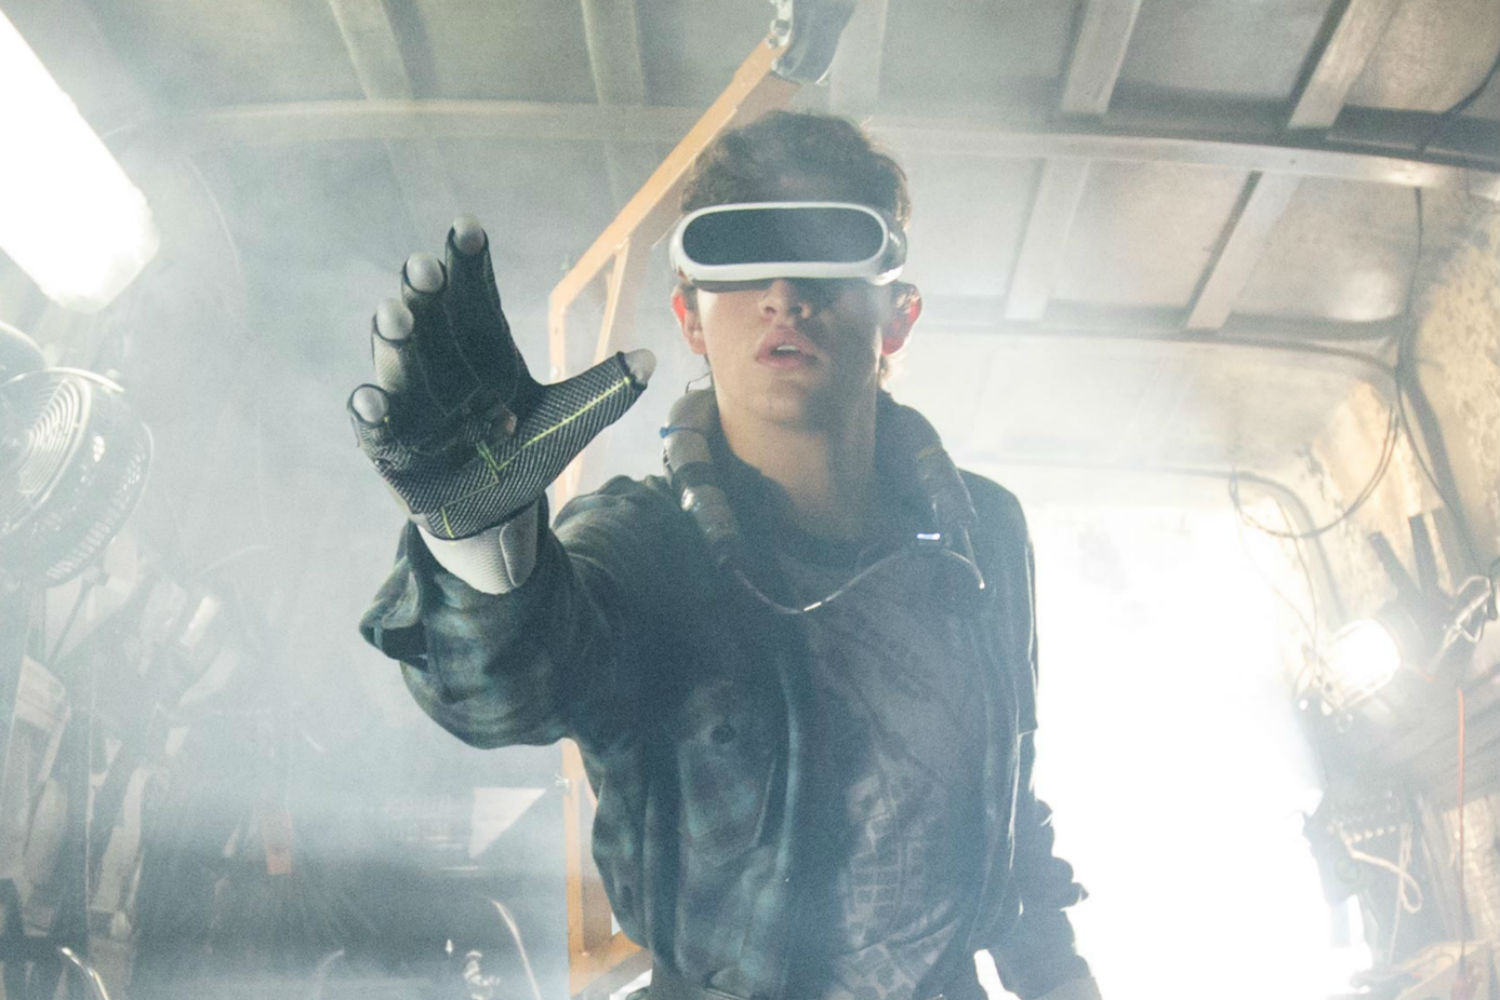 Ready Player One Is Certified Fresh